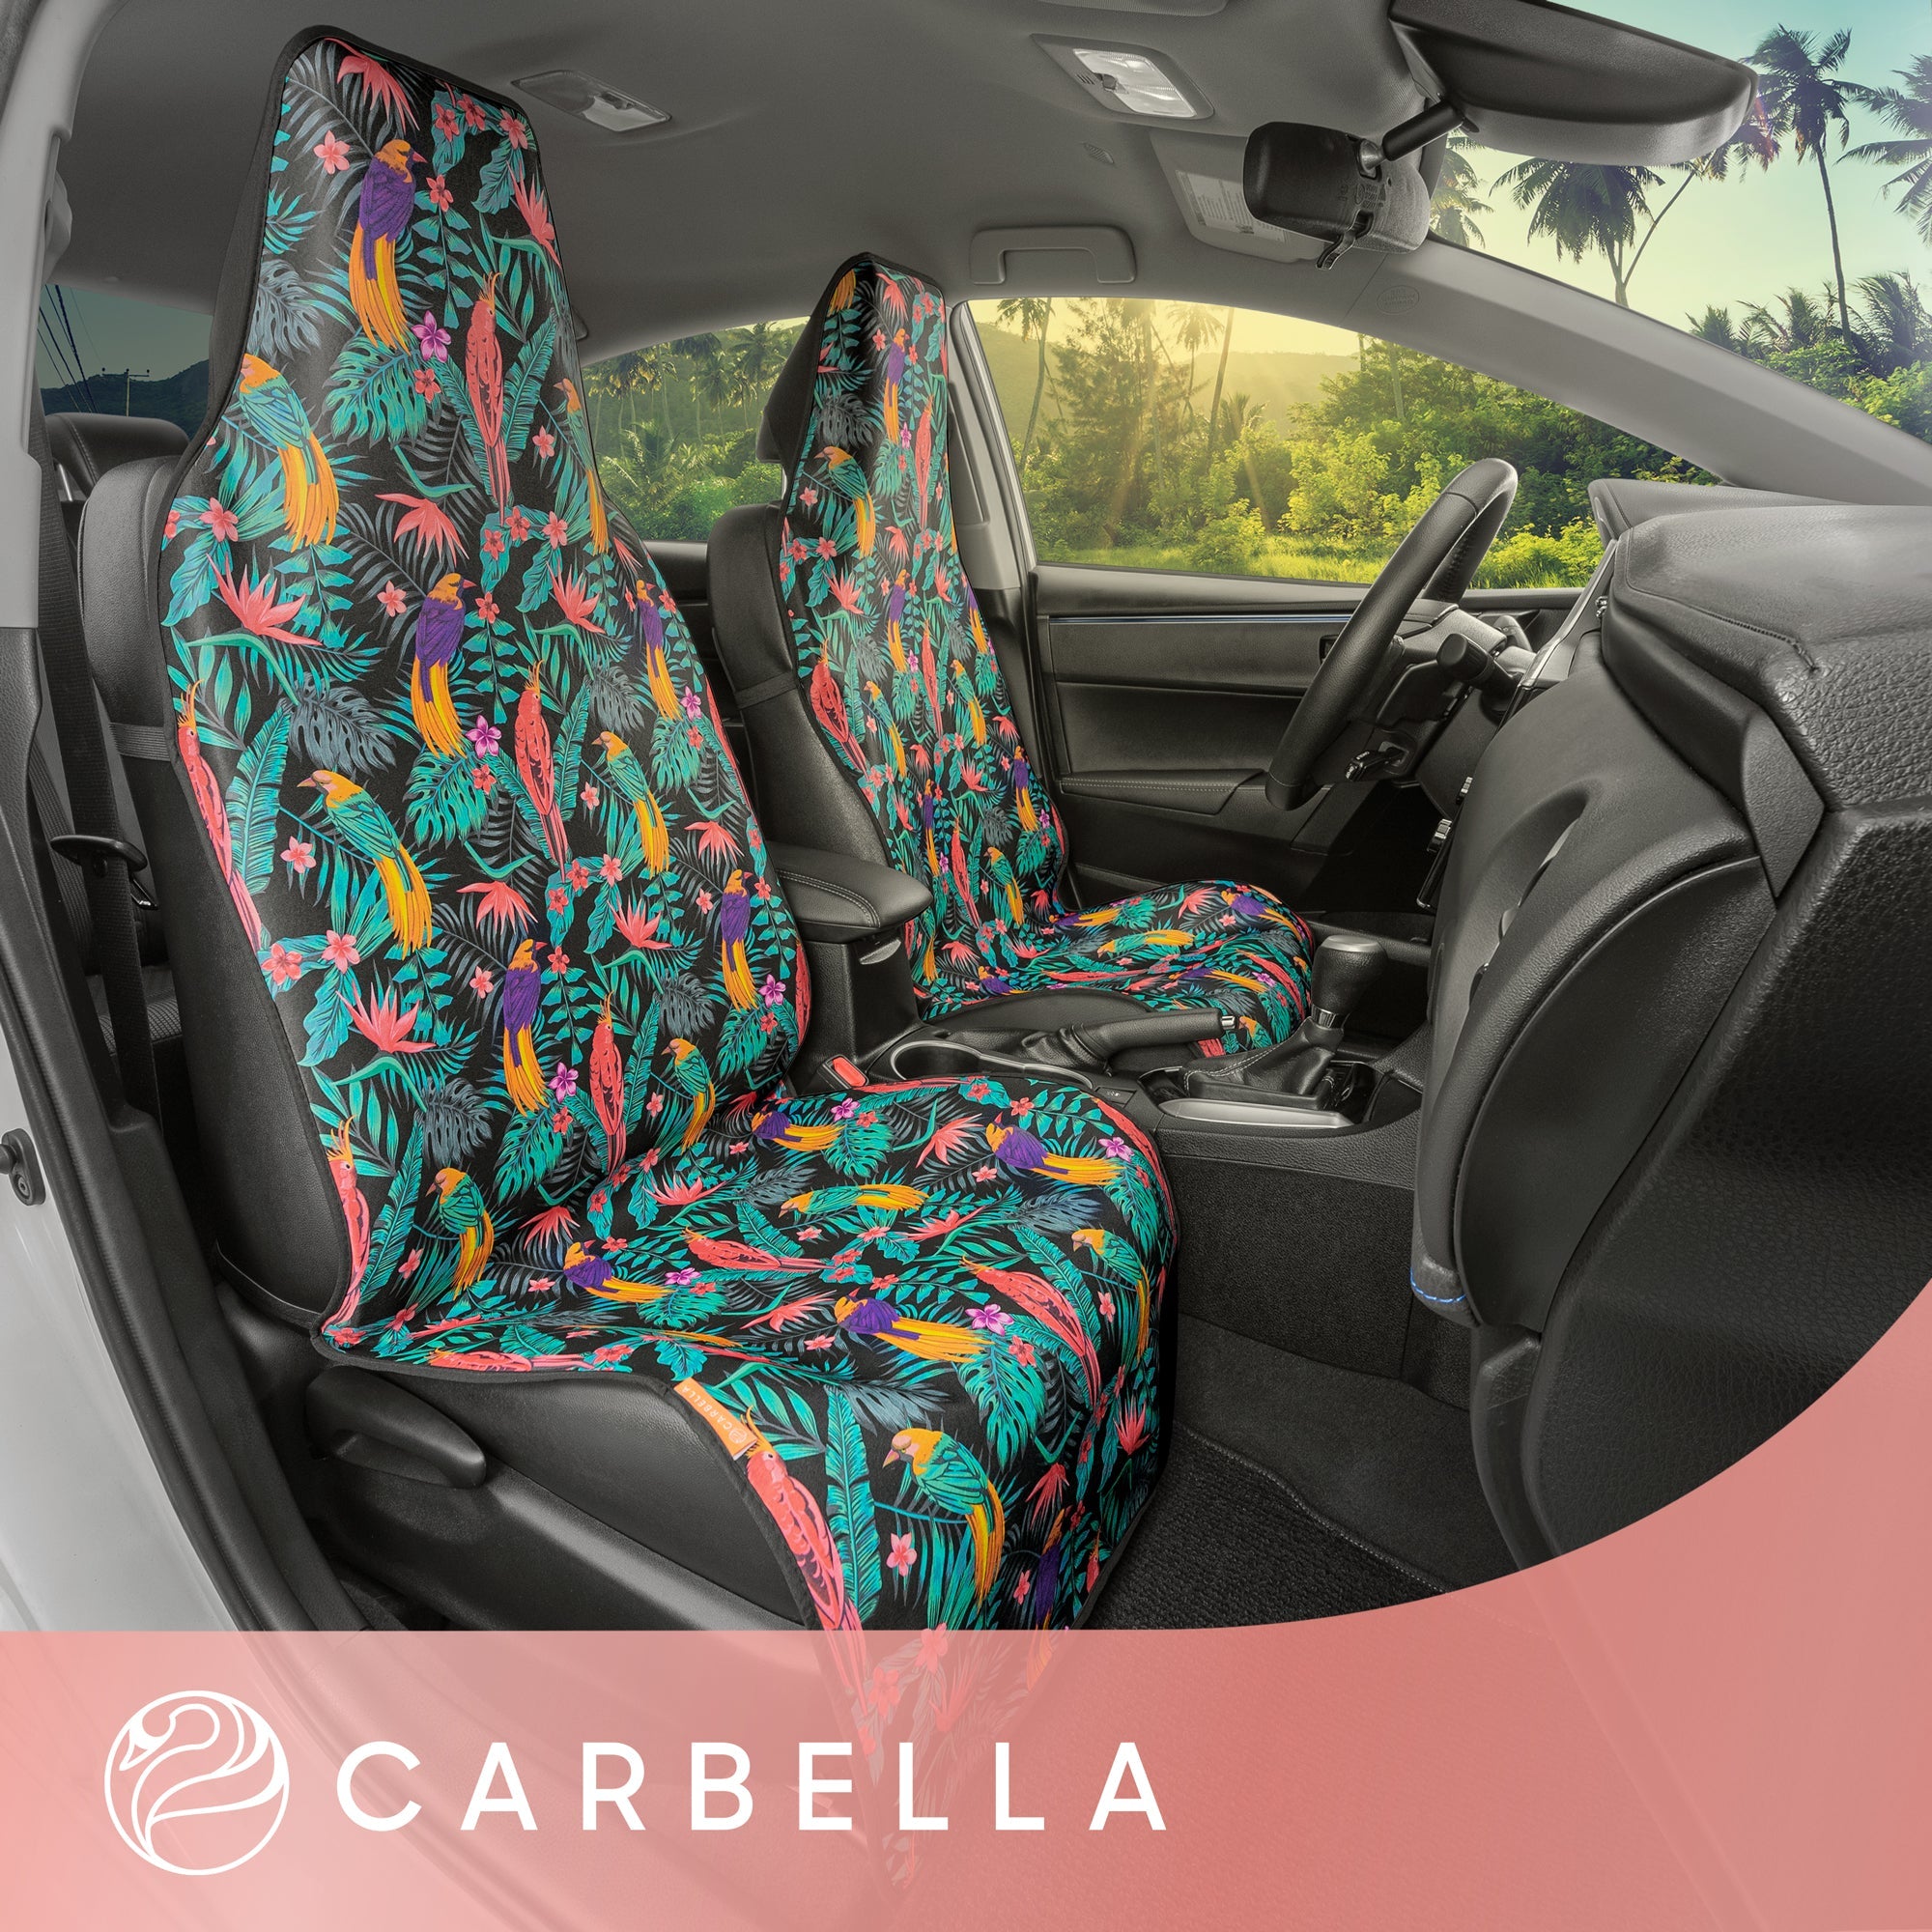 Carbella Turquoise Tropical Birds Car Seat Covers, 2 Pack Birds & Palm Leaves Front Seat Covers for Cars Trucks SUV, Car Accessories for Women